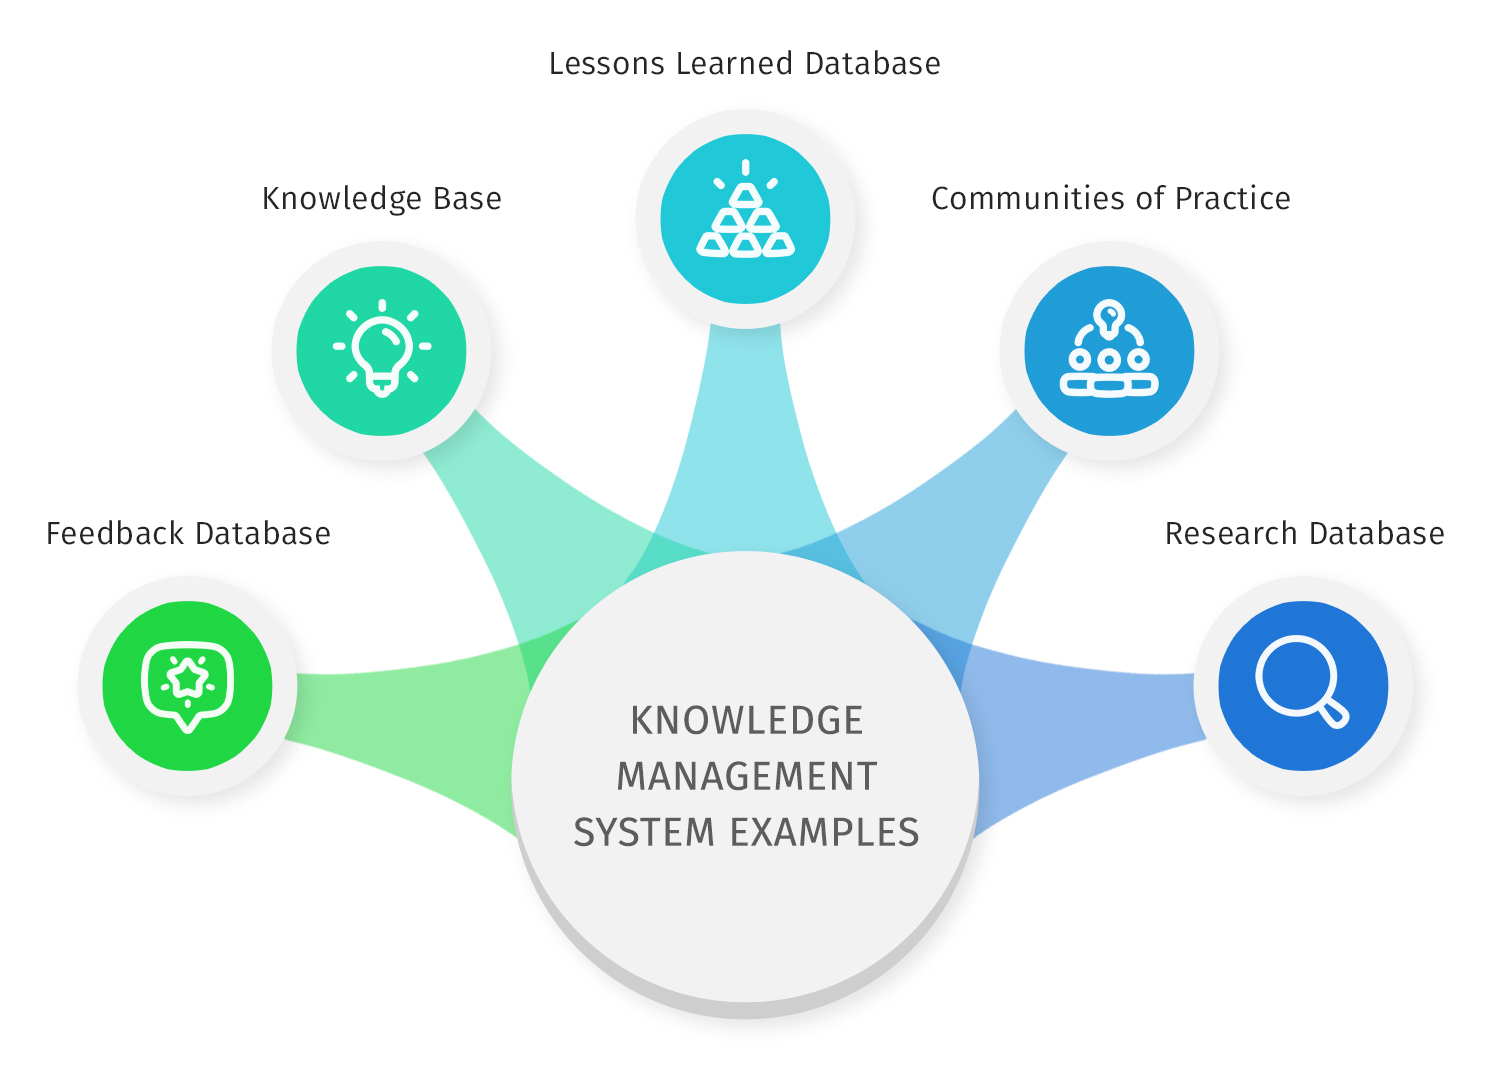 Knowledge management system examples